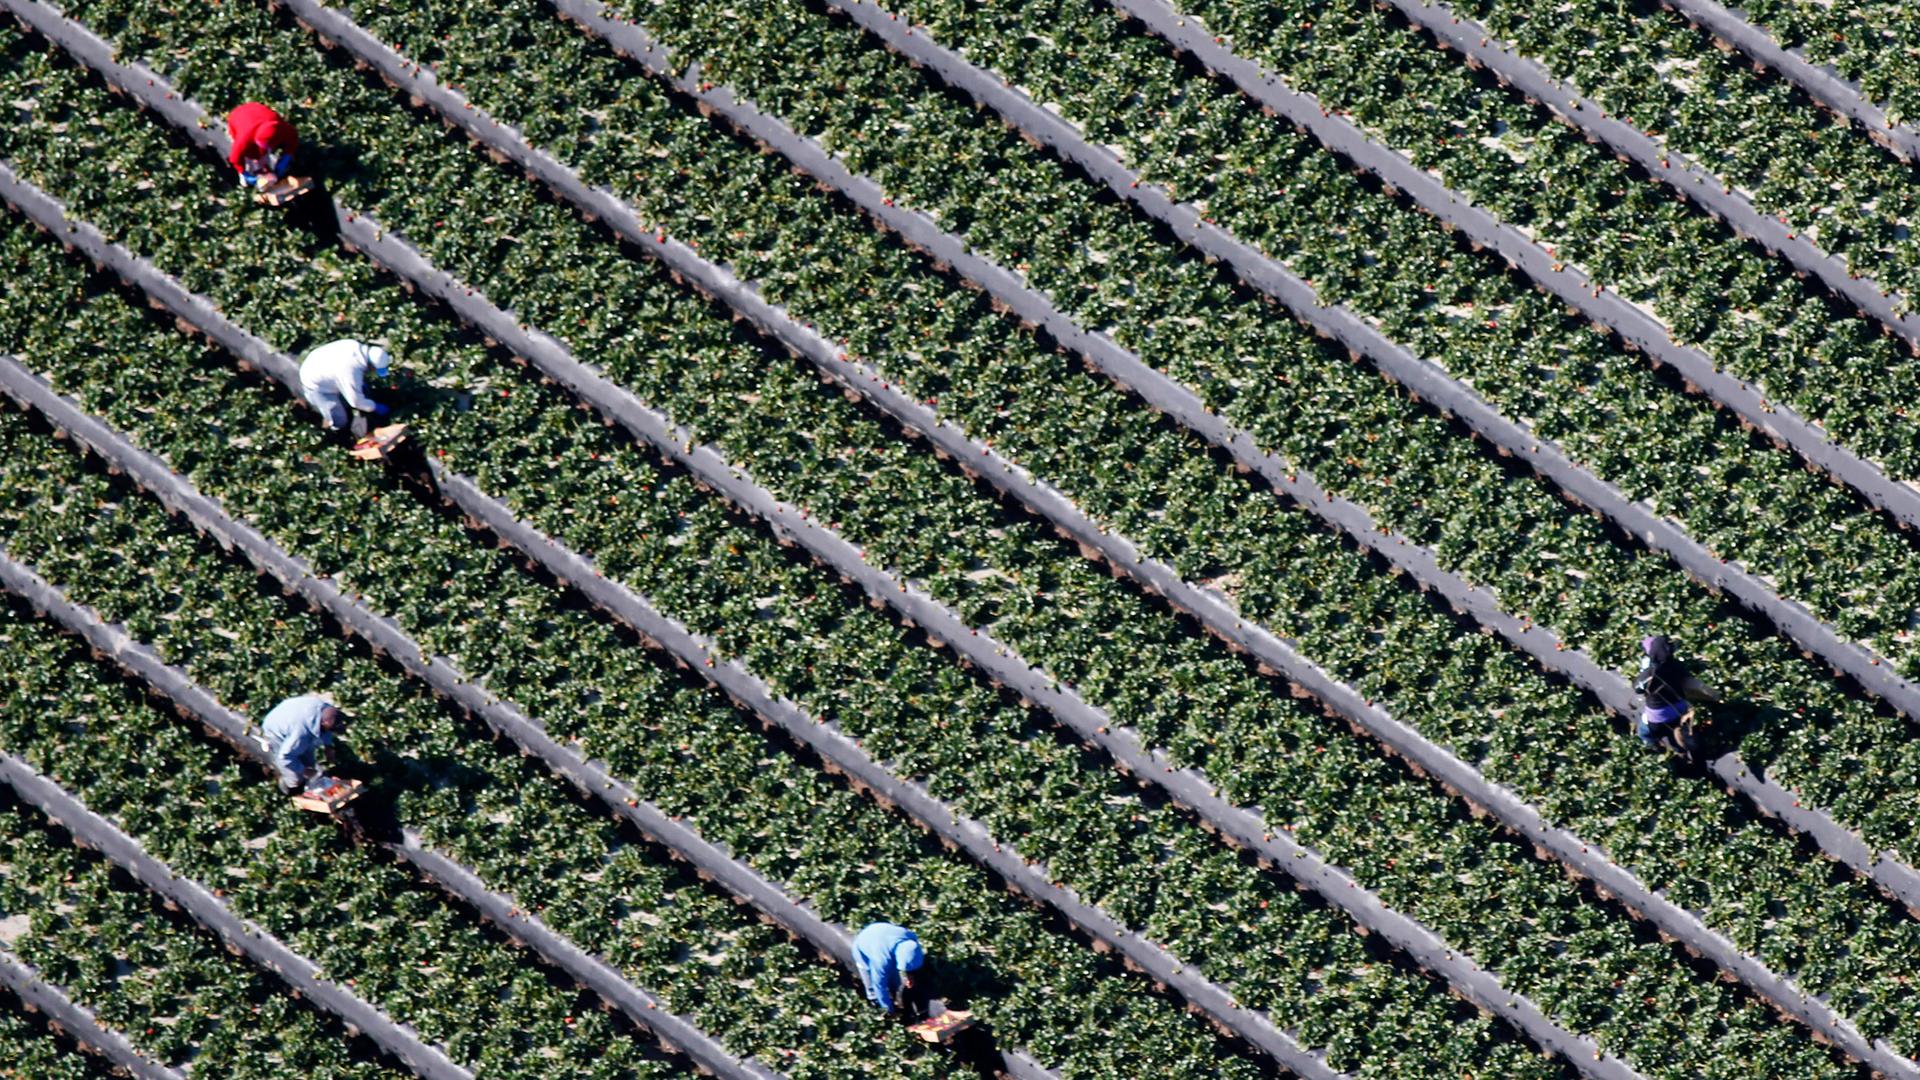 Workers pick strawberries in a field on a farm in Oxnard, California, on February 24, 2015.